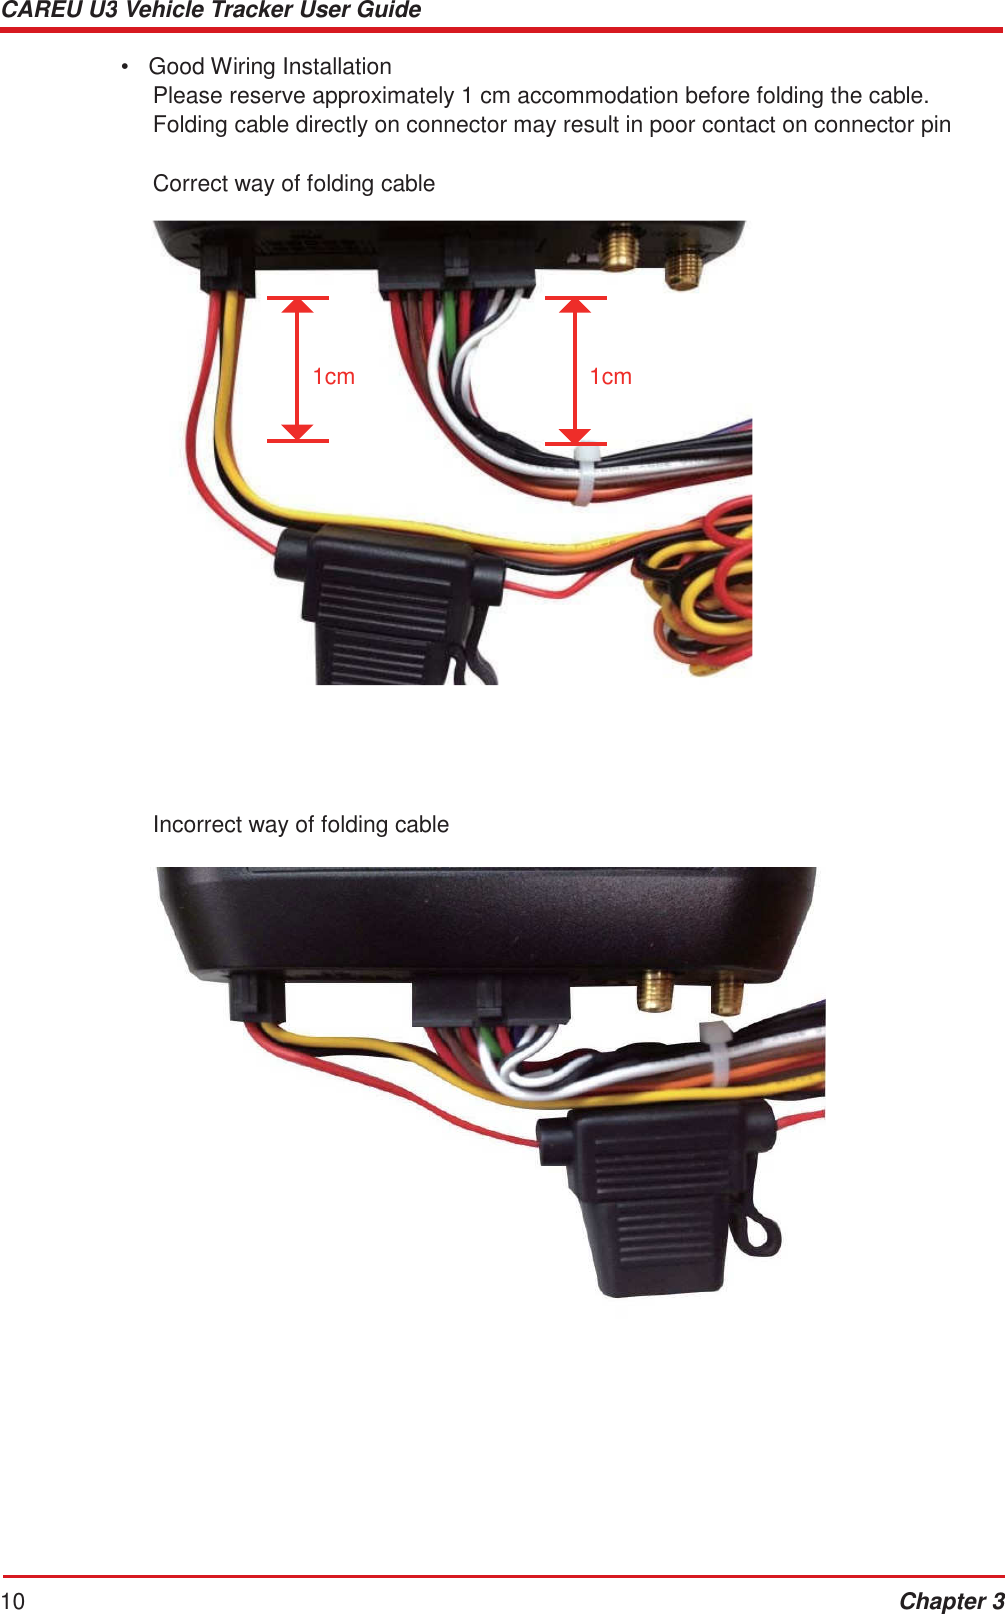 CAREU U3 Vehicle Tracker User Guide 10 Chapter 3    •  Good Wiring Installation Please reserve approximately 1 cm accommodation before folding the cable. Folding cable directly on connector may result in poor contact on connector pin  Correct way of folding cable         1cm 1cm                     Incorrect way of folding cable   